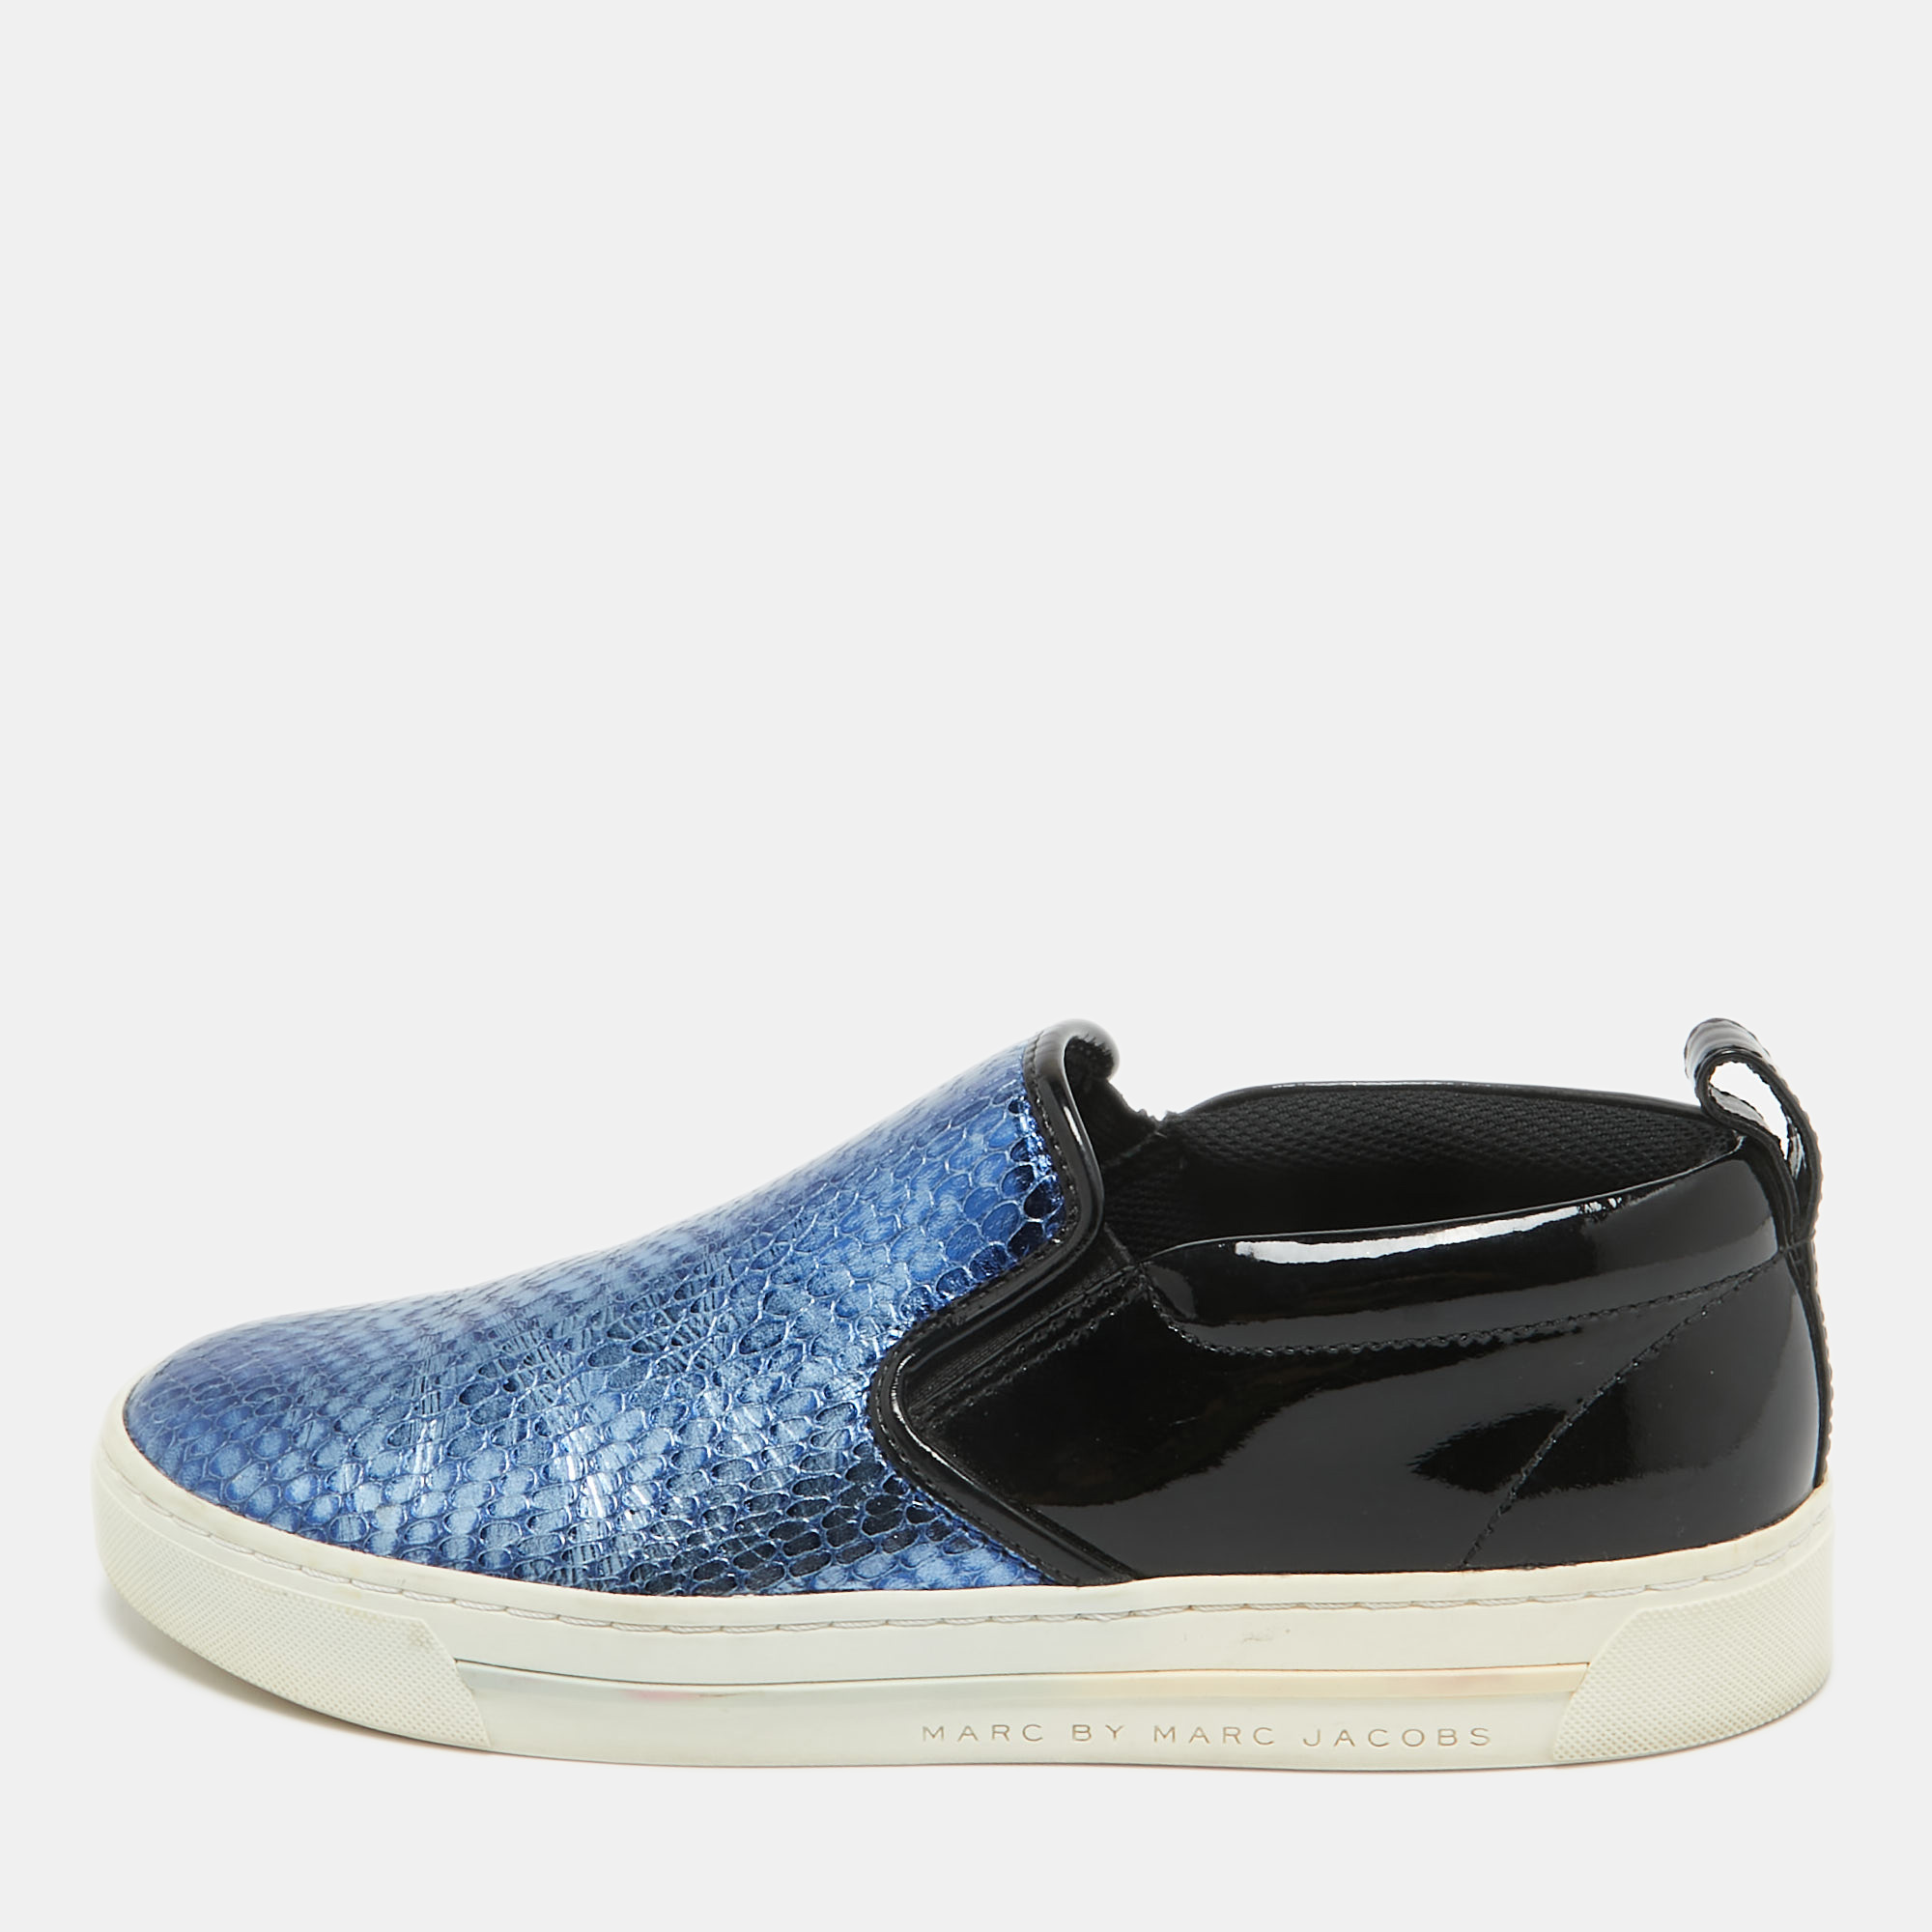 Marc by marc jacobs blue python embossed leather broome sneakers size 36